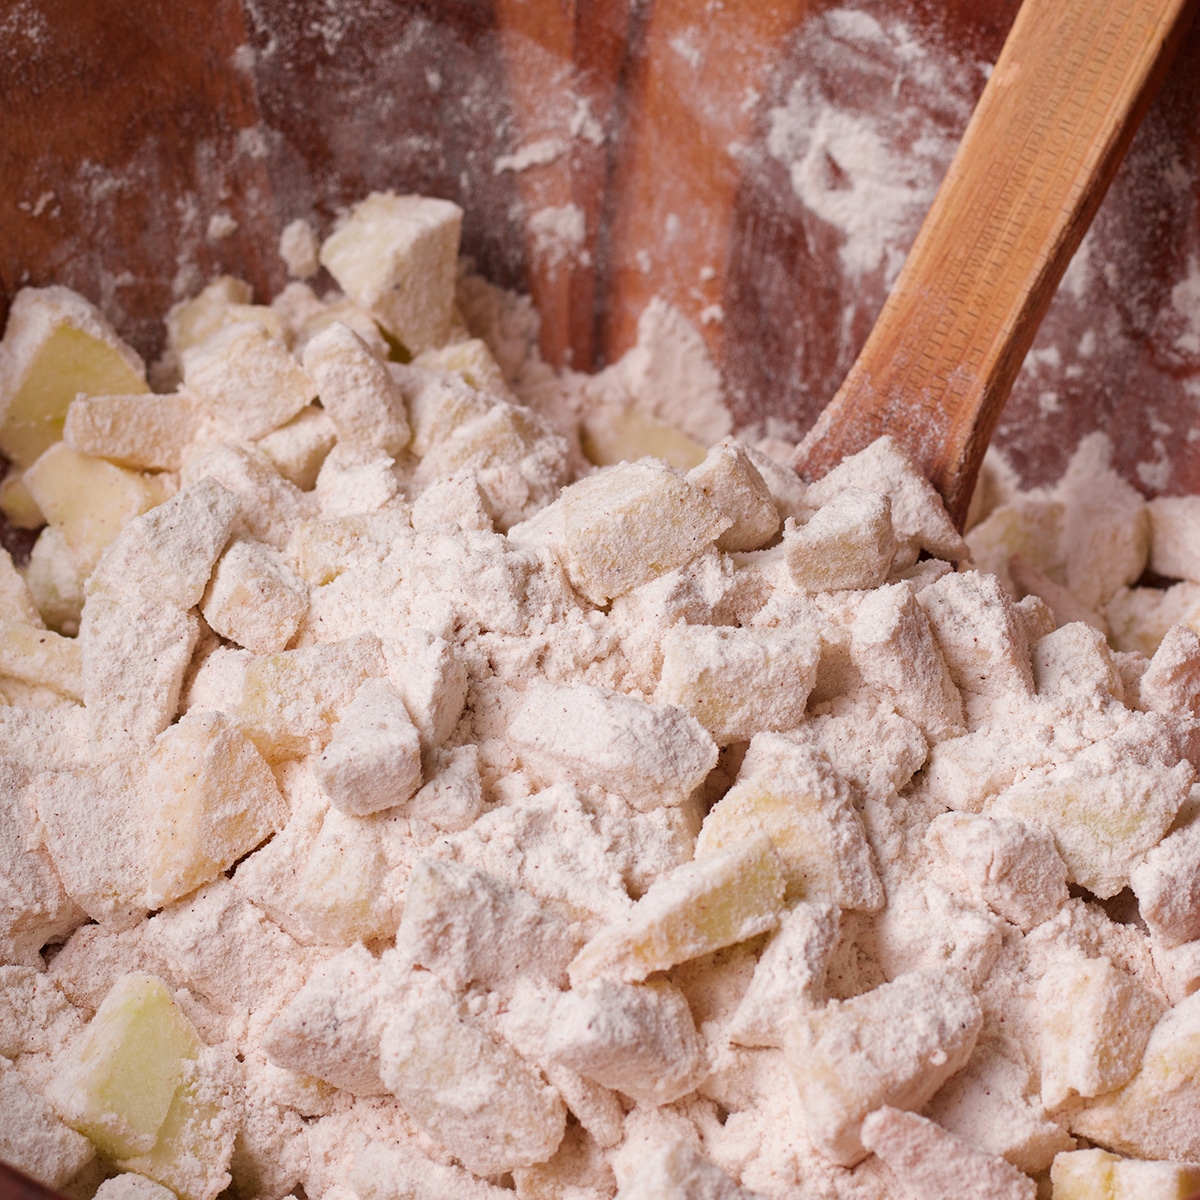 Using a wood spoon to stir chopped apples into flour.